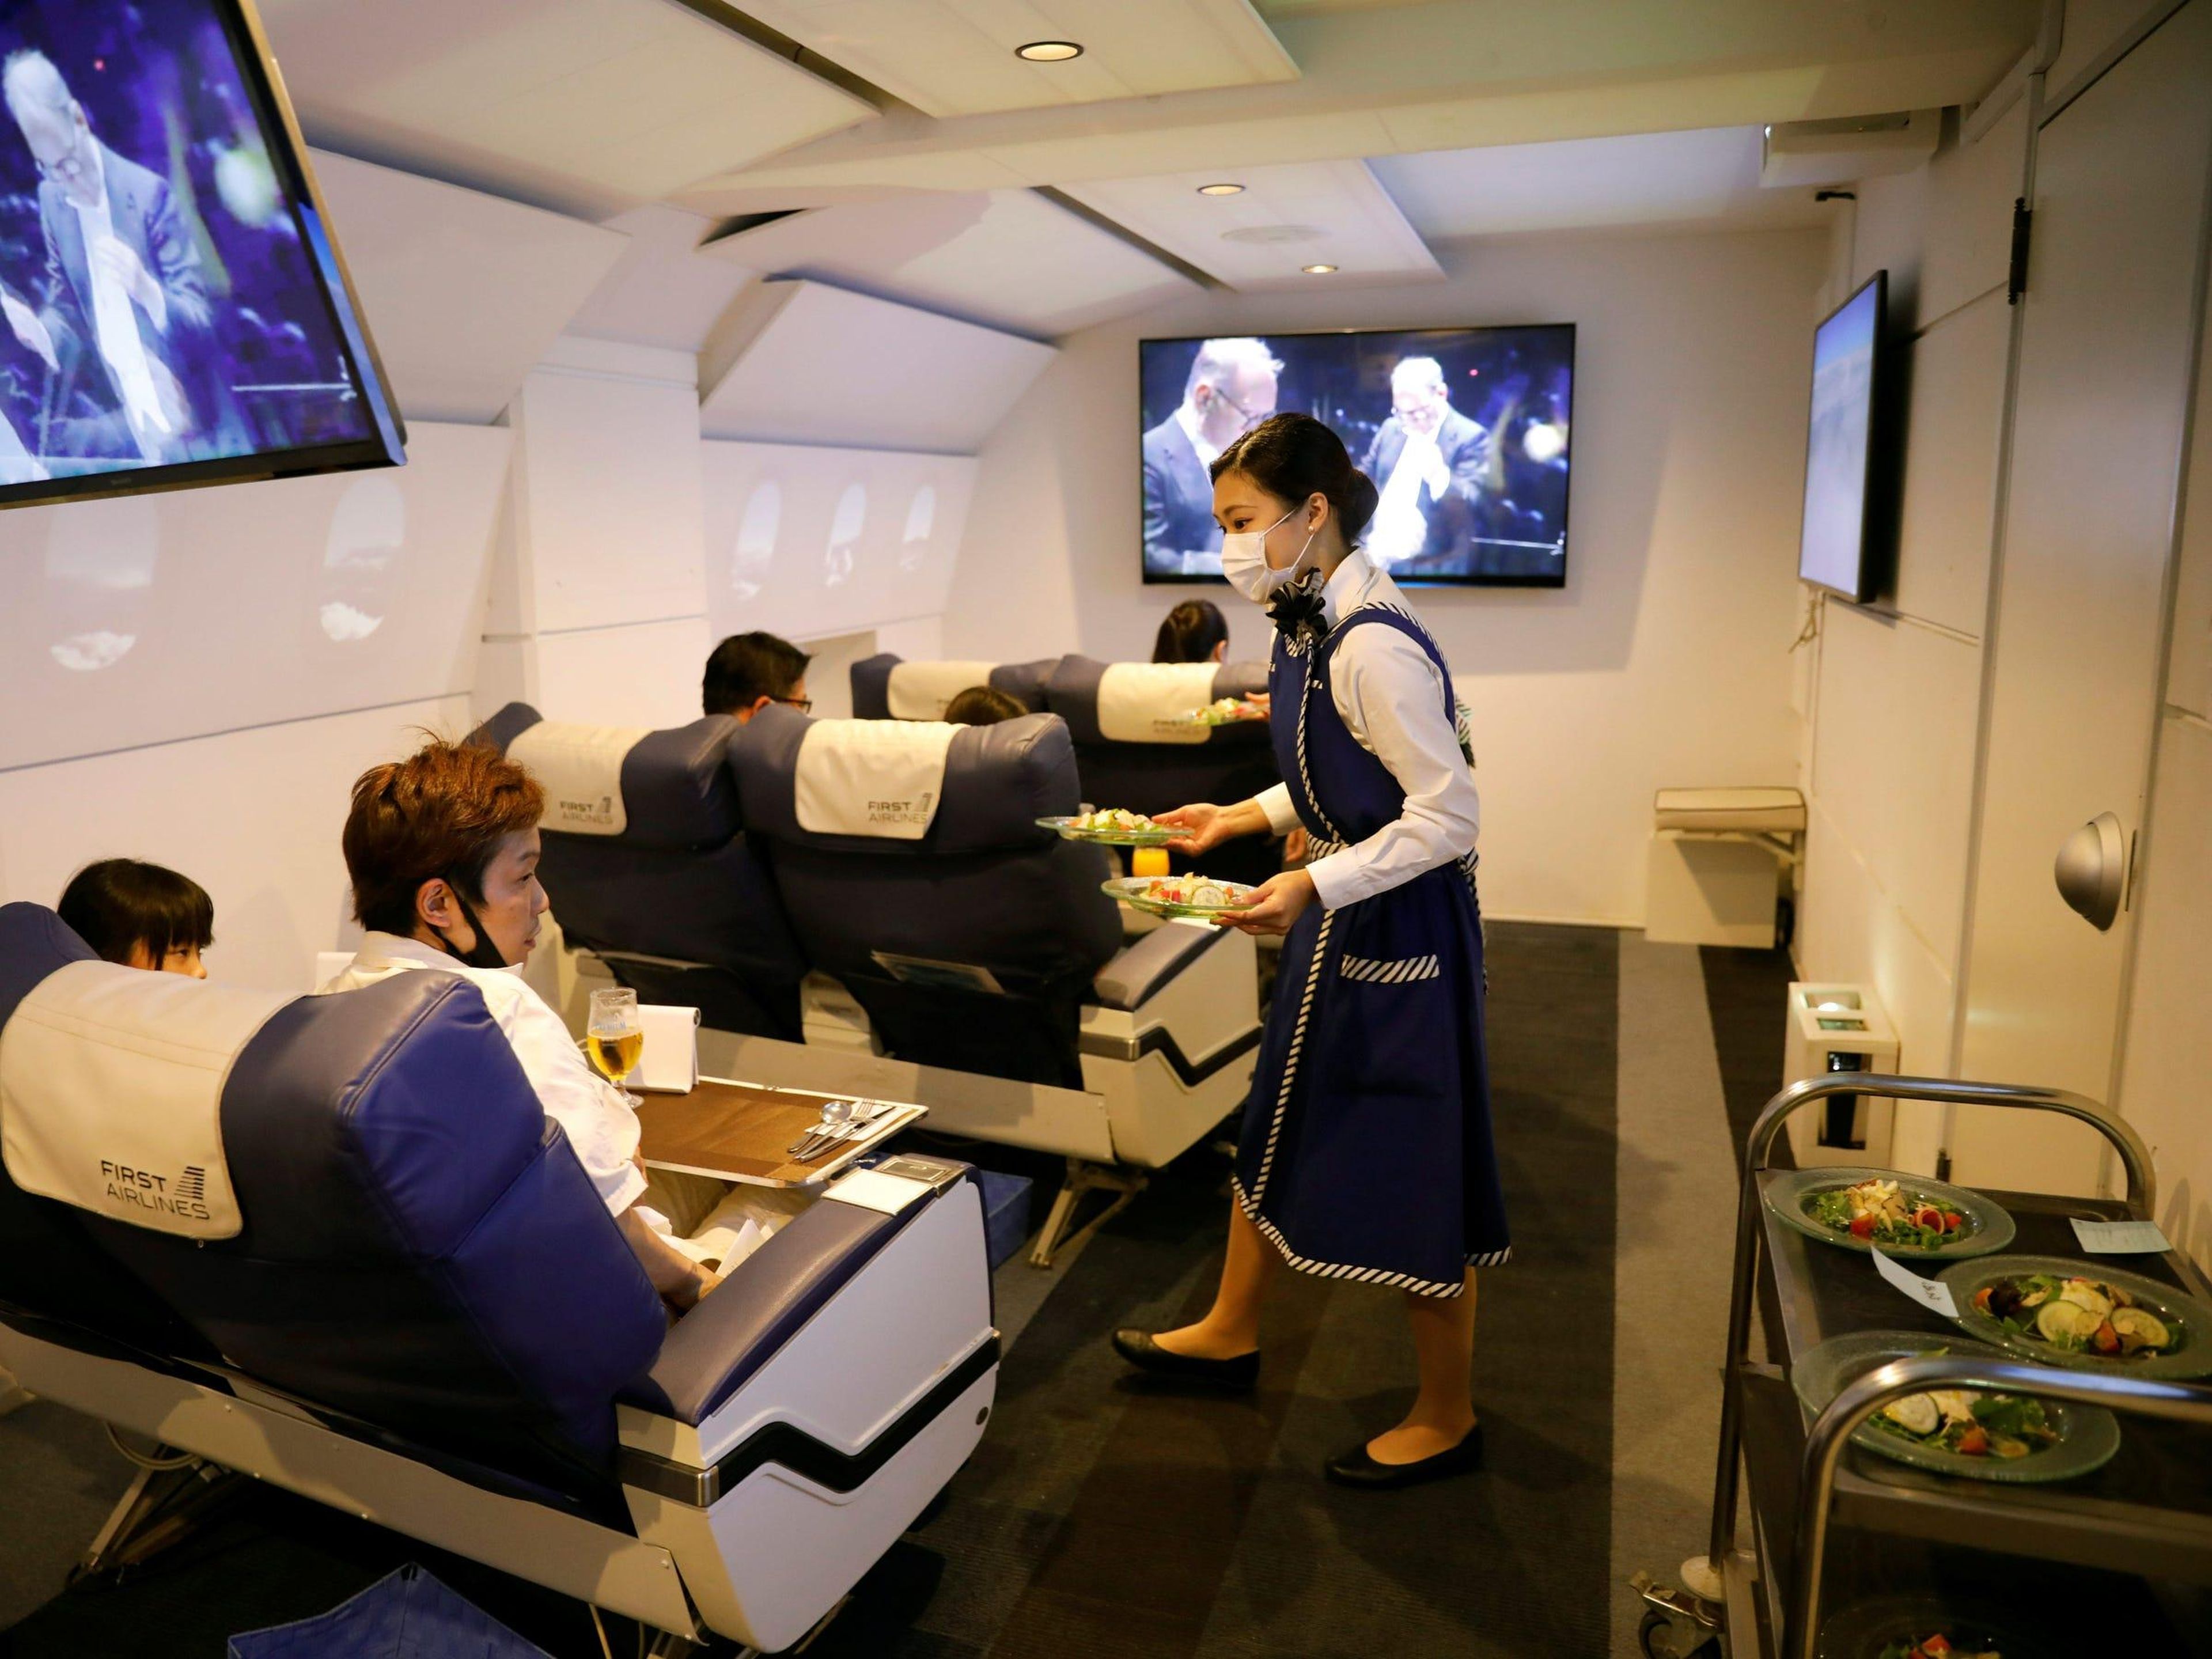 A staff dressed as a flight attendant serves meals to customers at First Airlines in Tokyo, Japan on August 12, 2020. Kim Kyung-Hoon/Reuters